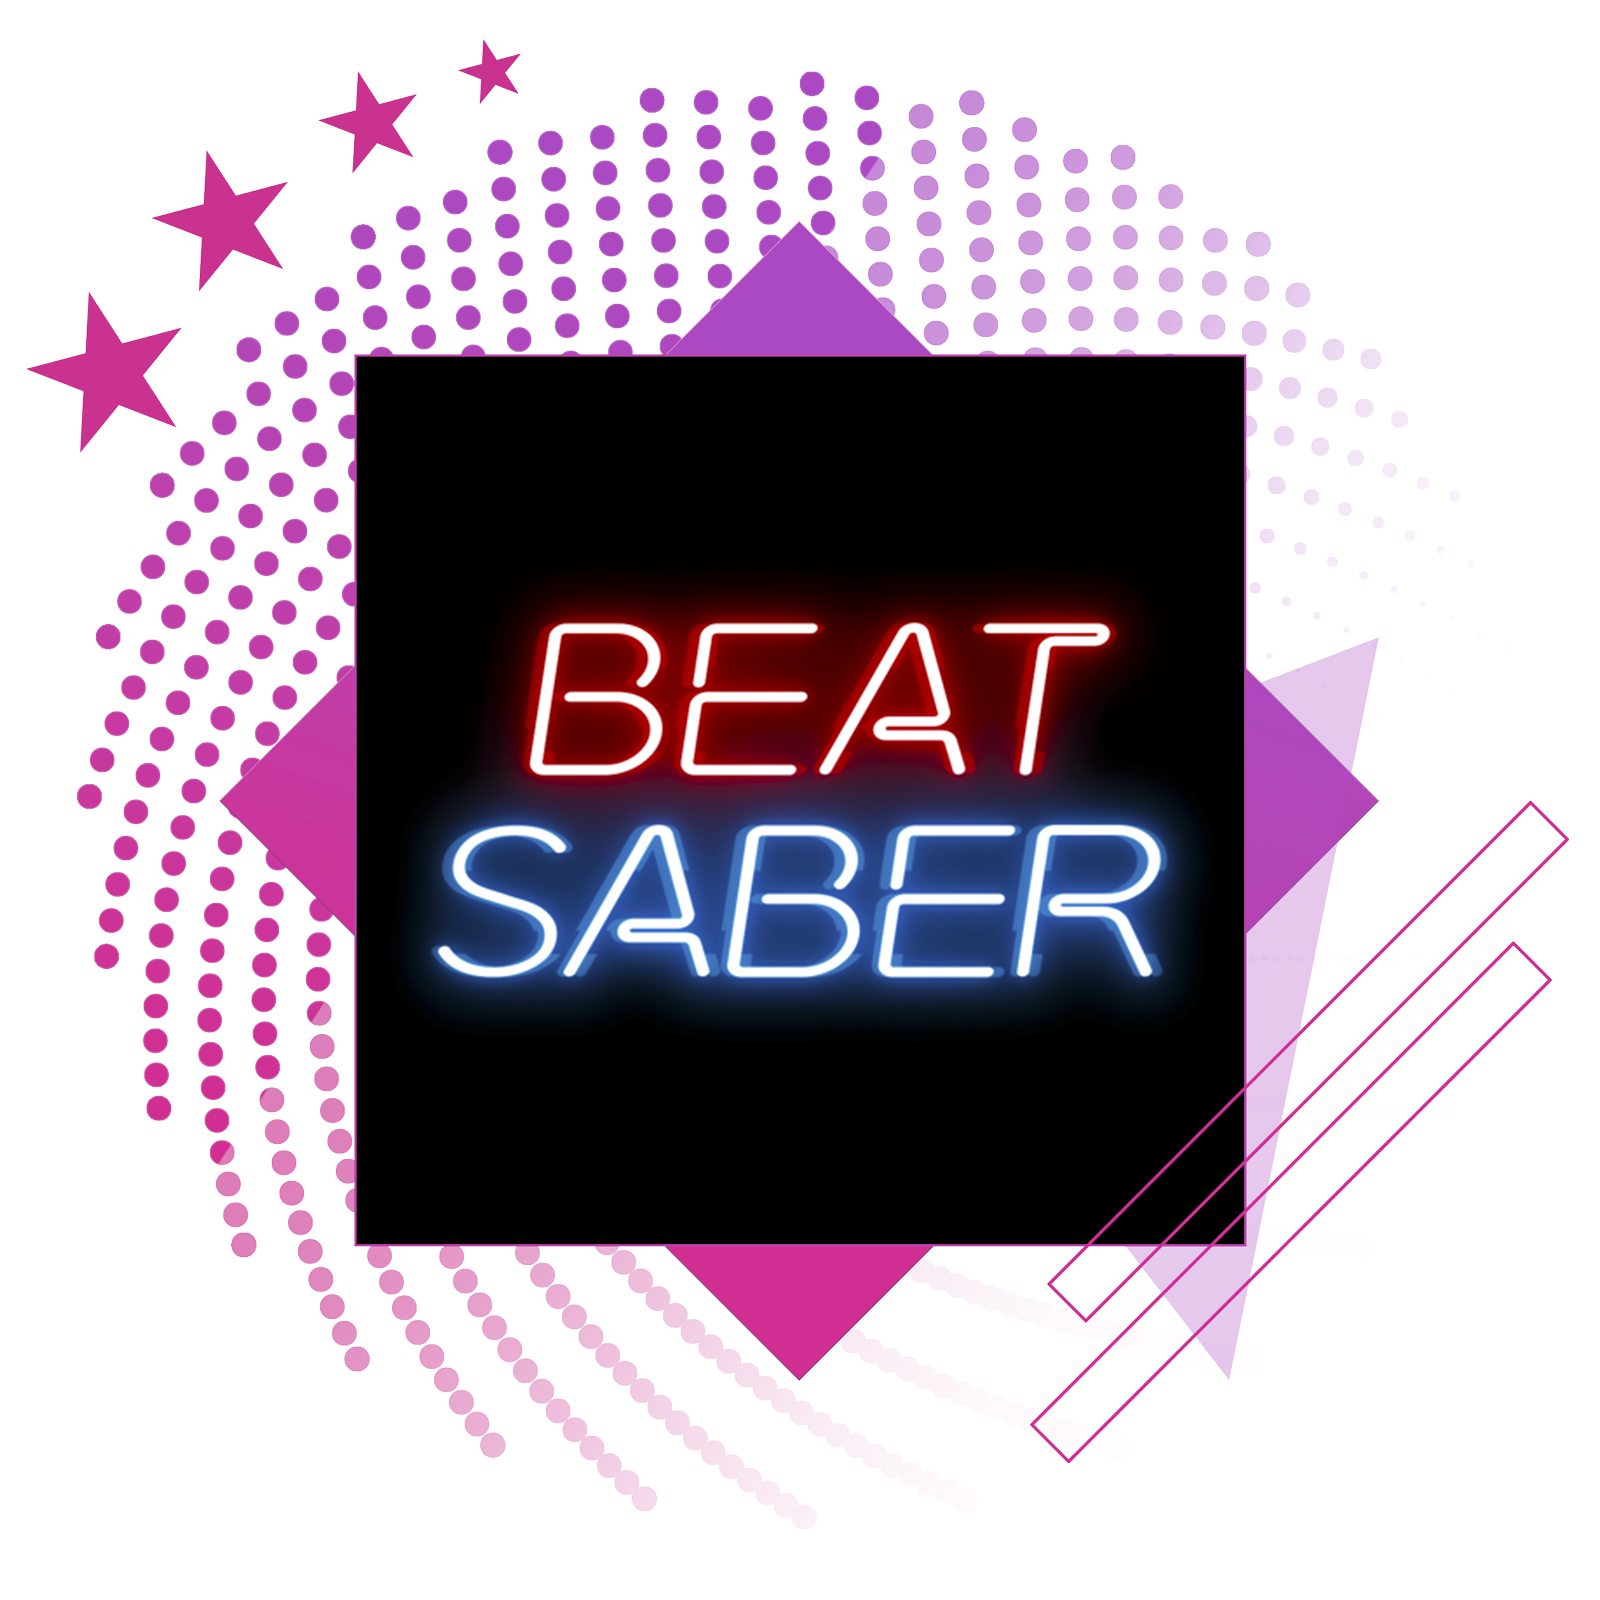 Best rhythm games feature image, featuring key art from Beat Saber.